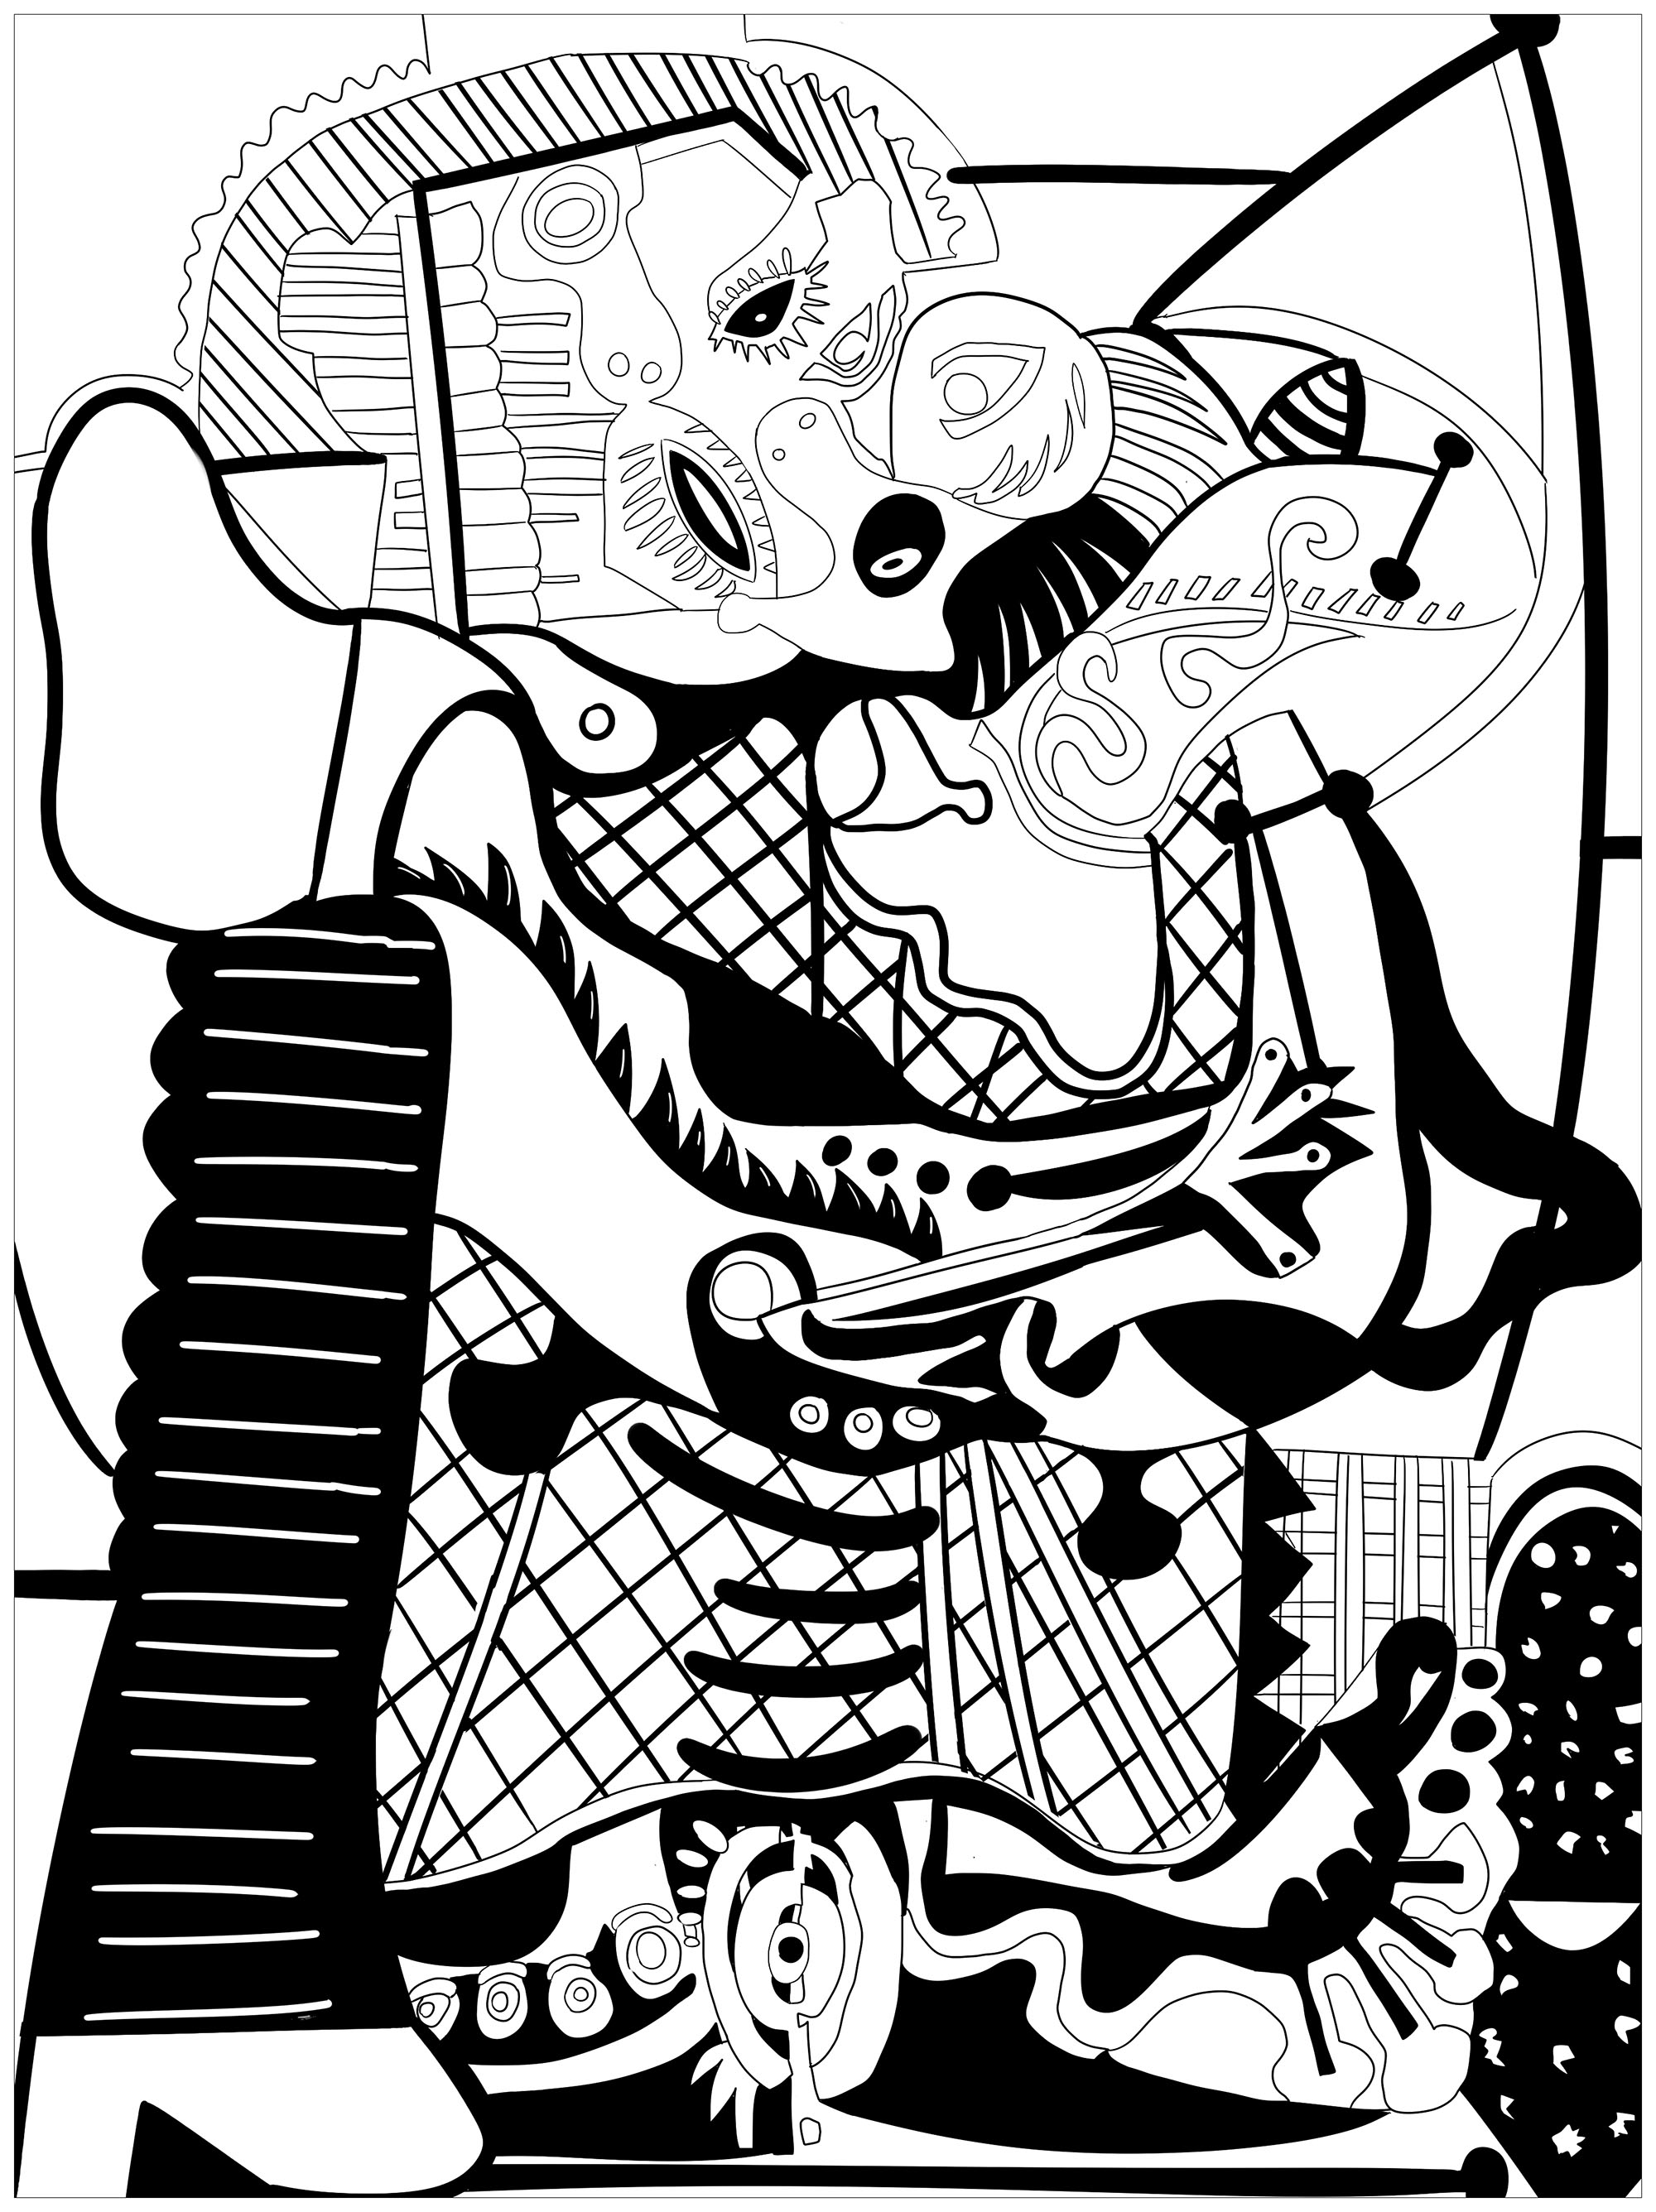 Coloring page inspired by a master piece by Pablo Picasso : The Kiss